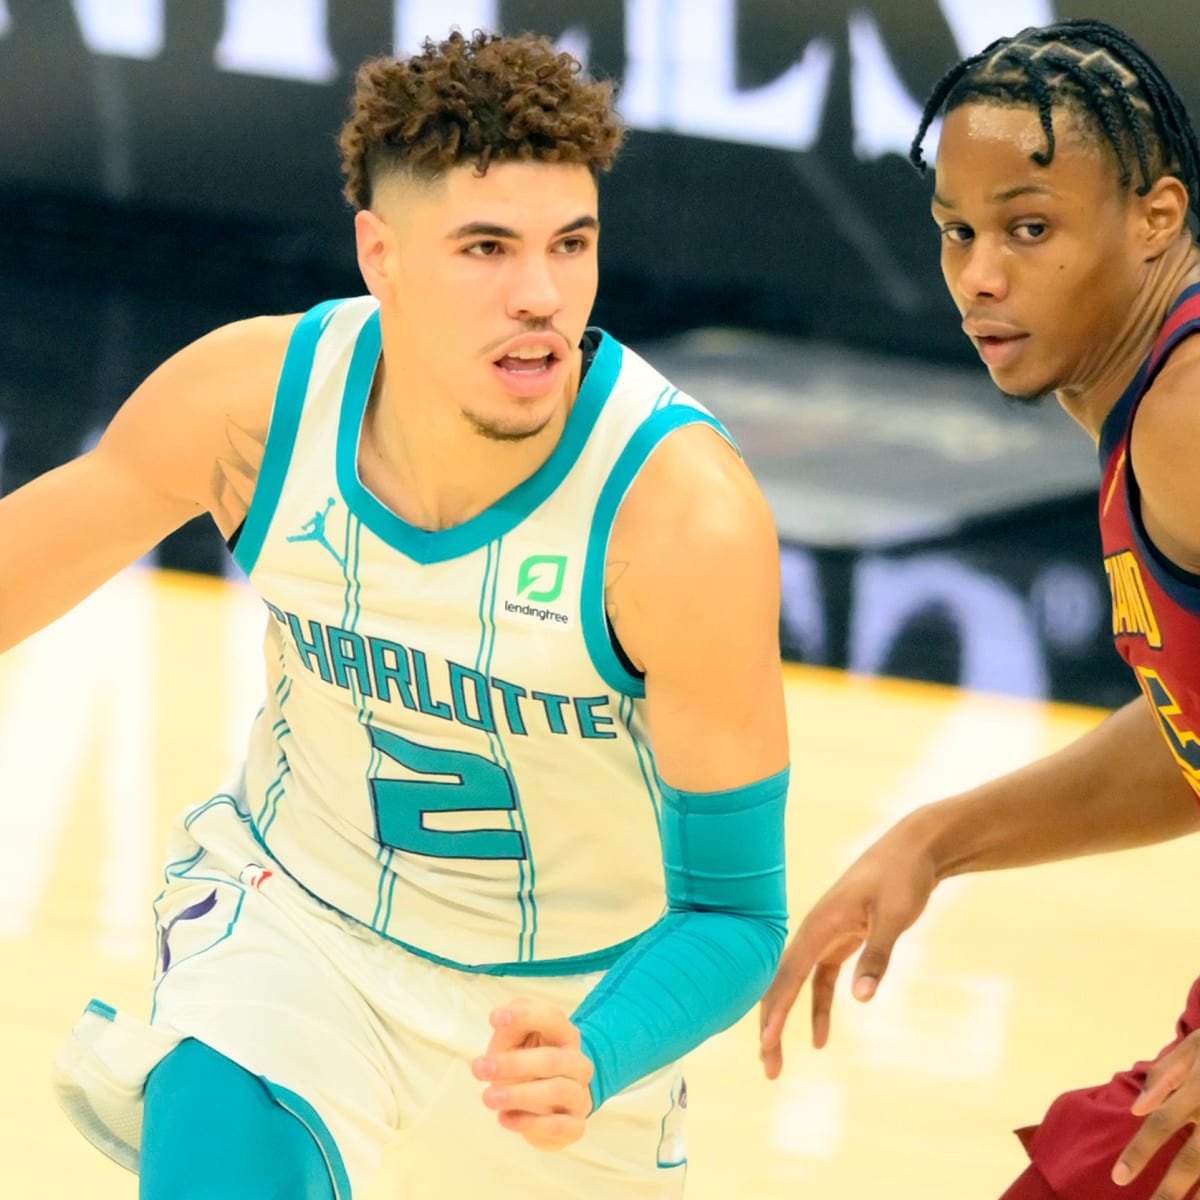 First Look at LaMelo Ball in No. 1 Jersey - Sports Illustrated